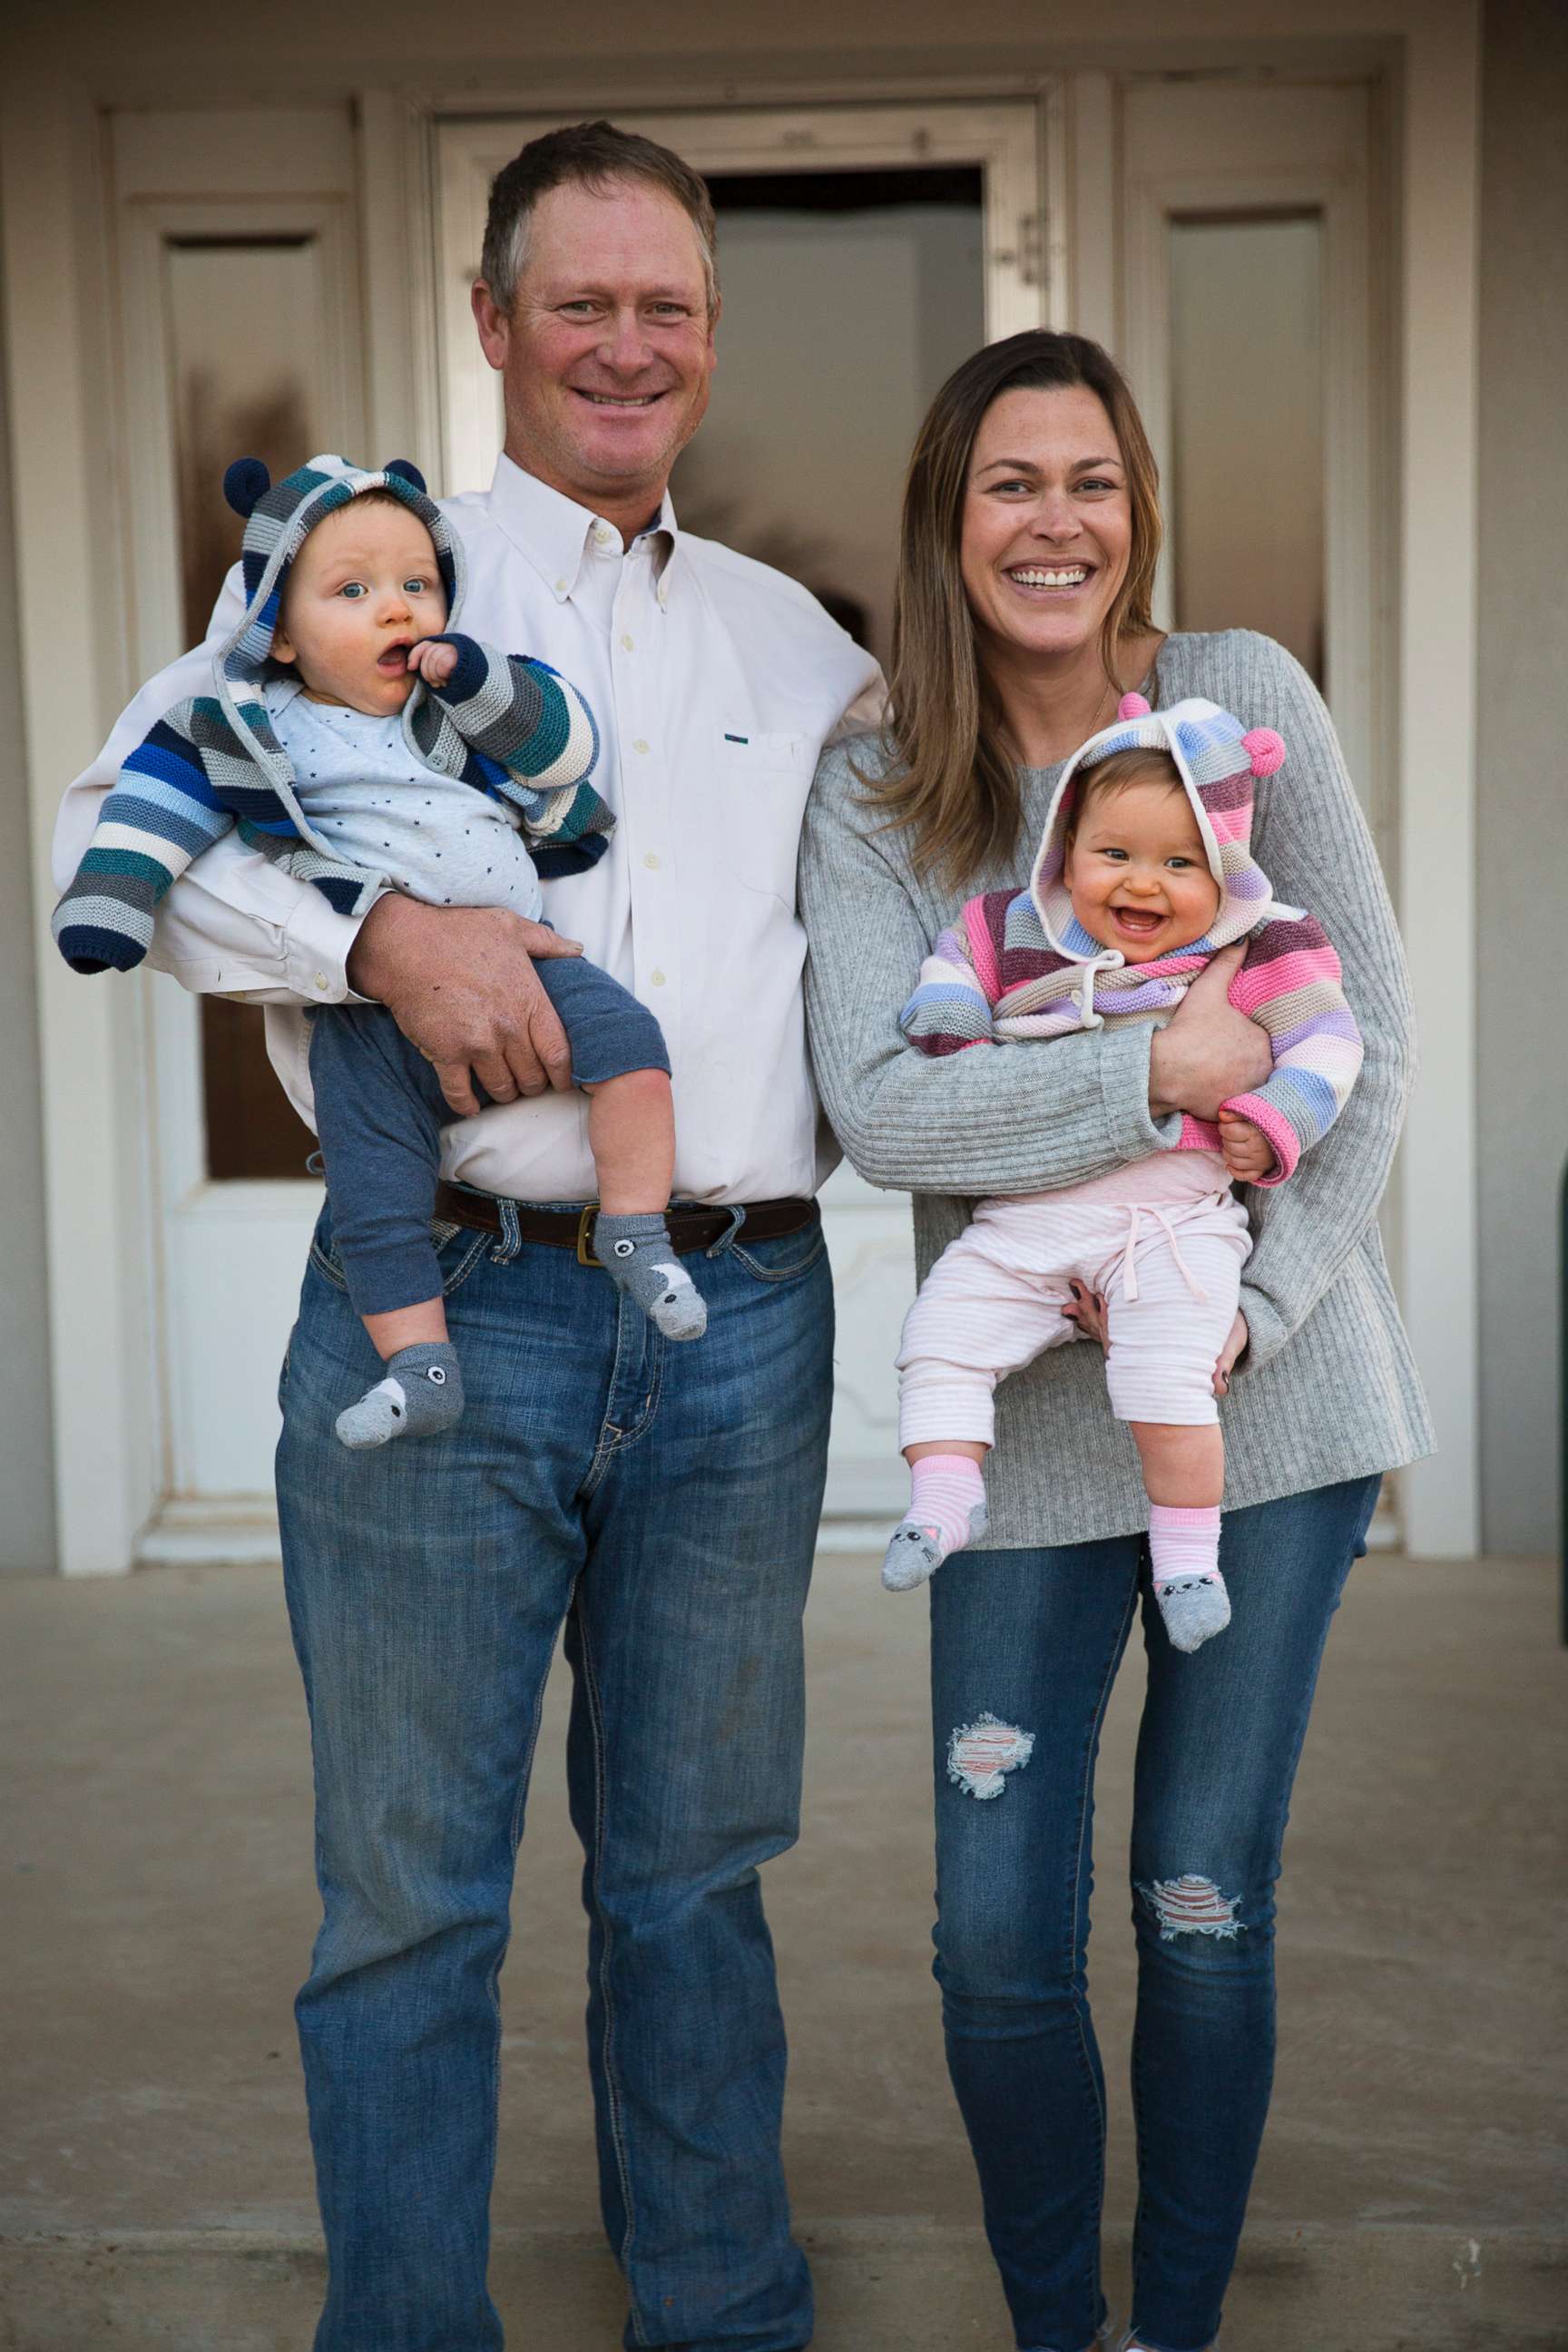 PHOTO: Cattle rancher and town mayor, Chad Breeding, with his wife Erin and their twins, Lillian and Wyatt, live in Roberts County, Texas, the most "pro-Trump county in America."